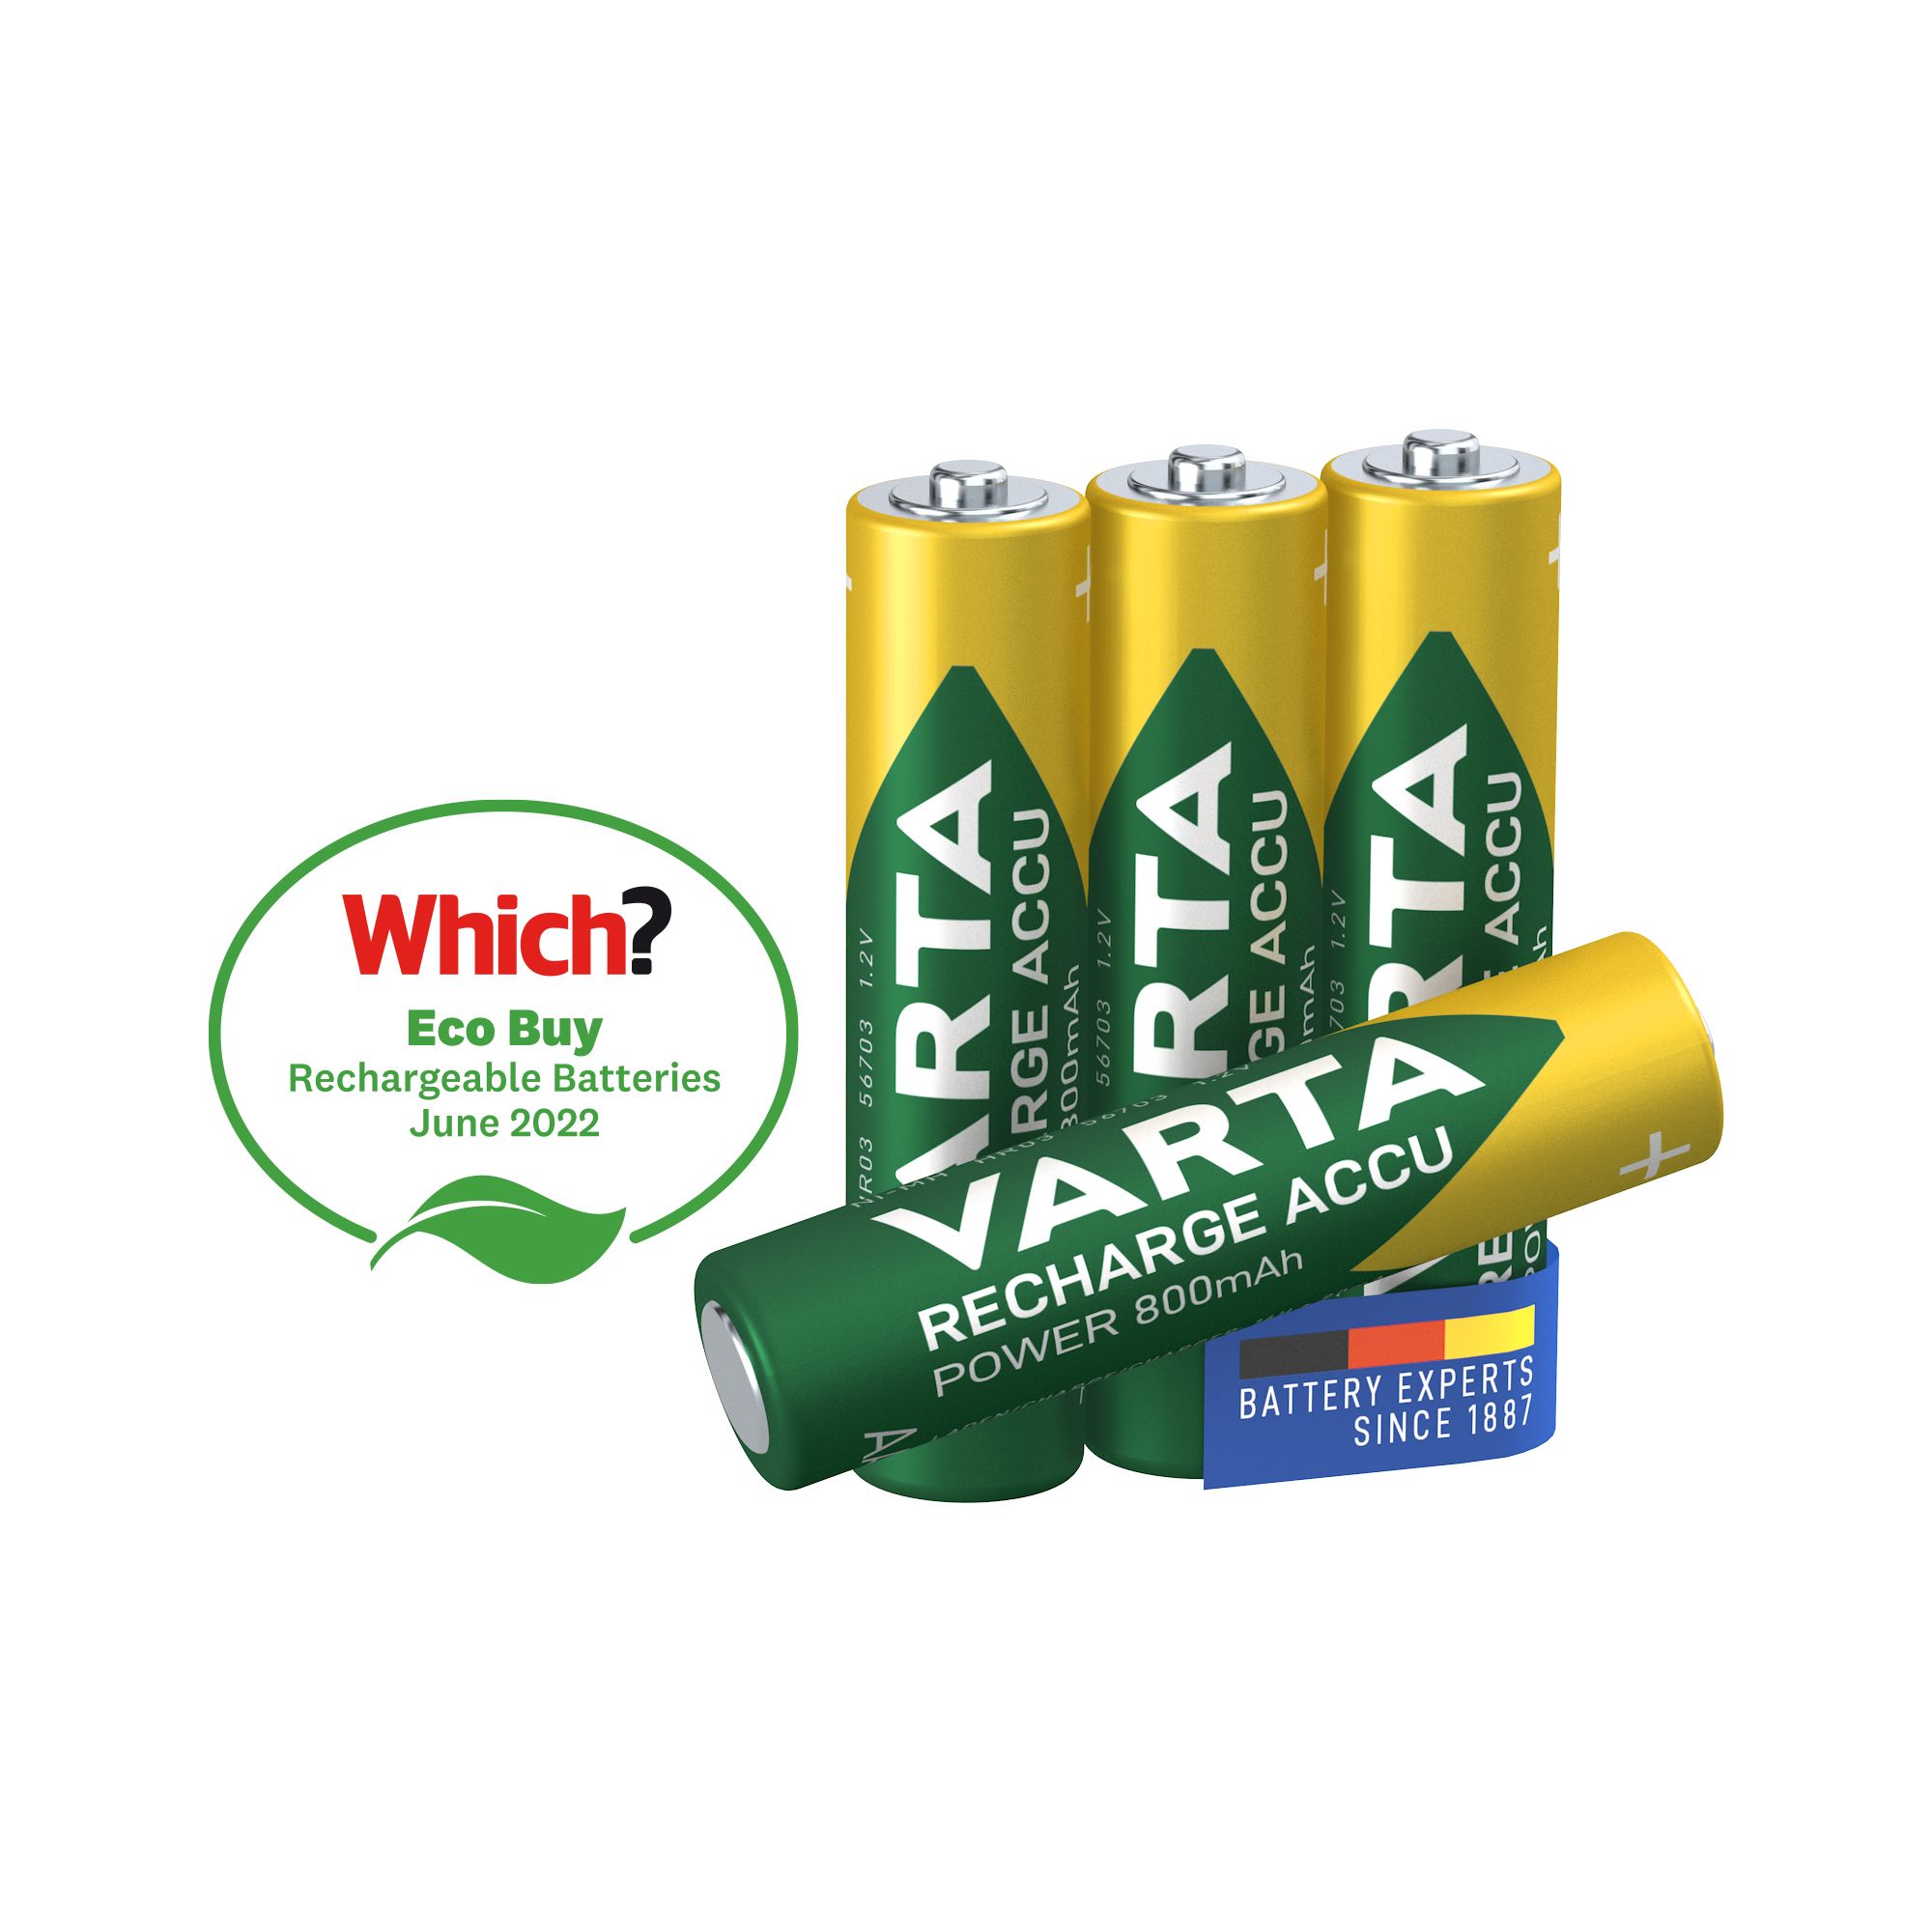 Varta Recharge ACCU Power (LR03) Pack DIY of 4 at B&Q | AAA Battery, Rechargeable